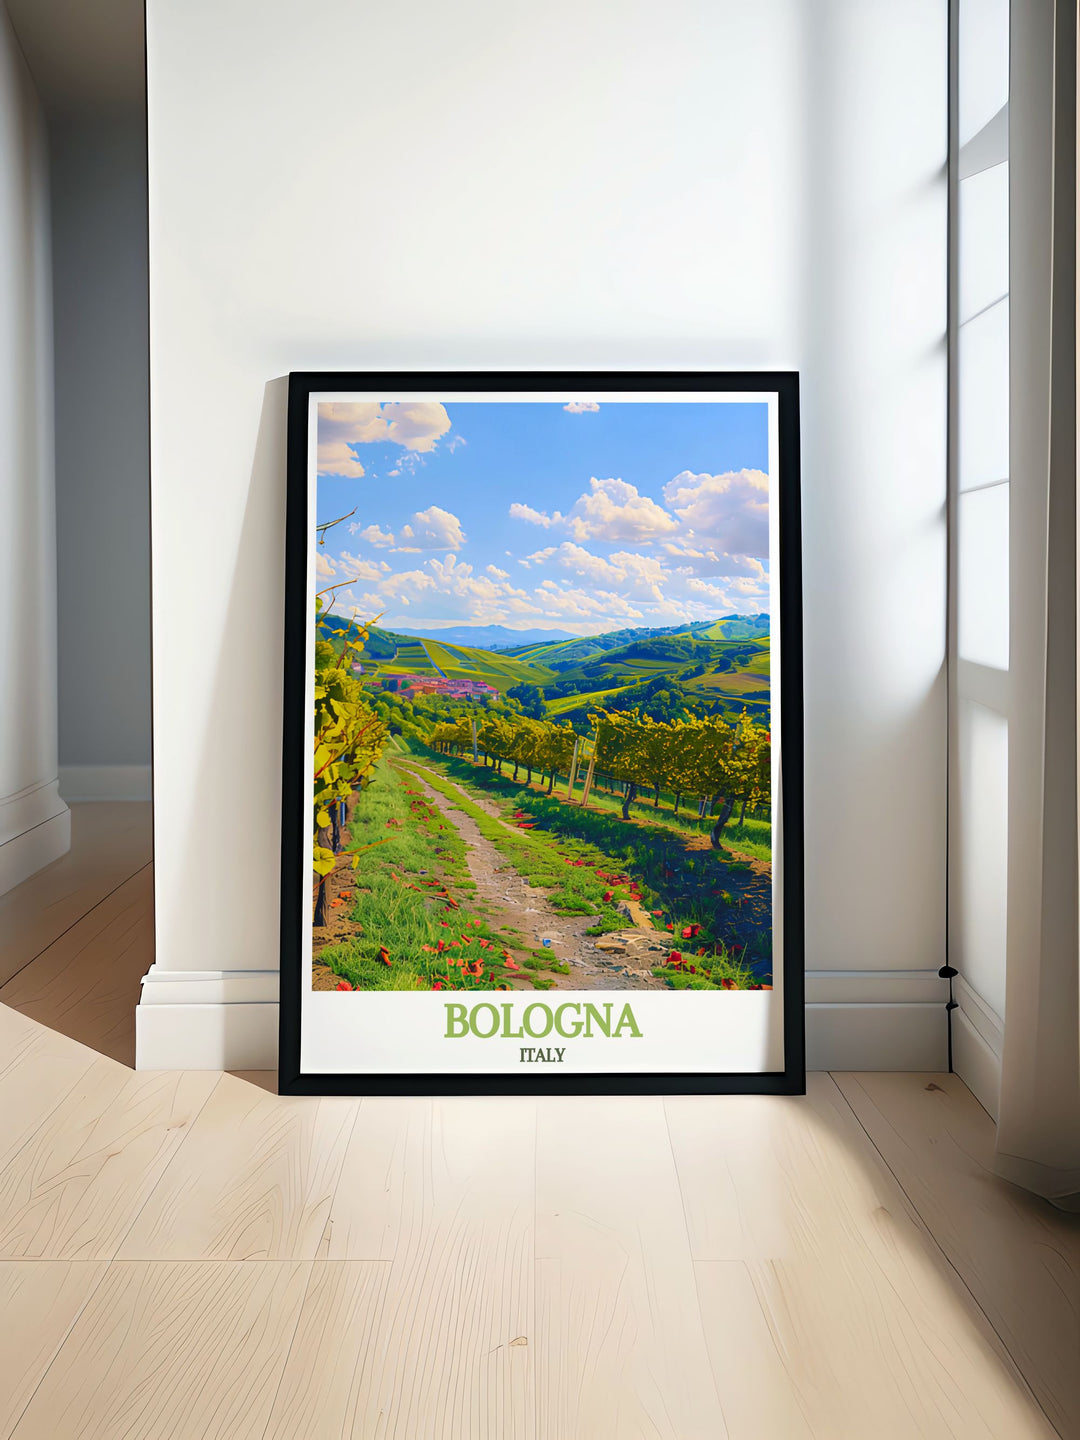 Captivating Bologna travel poster featuring the historic architecture and scenic landscapes of Colli Bolognesi, perfect for adding Italys cultural and natural charm to your decor.